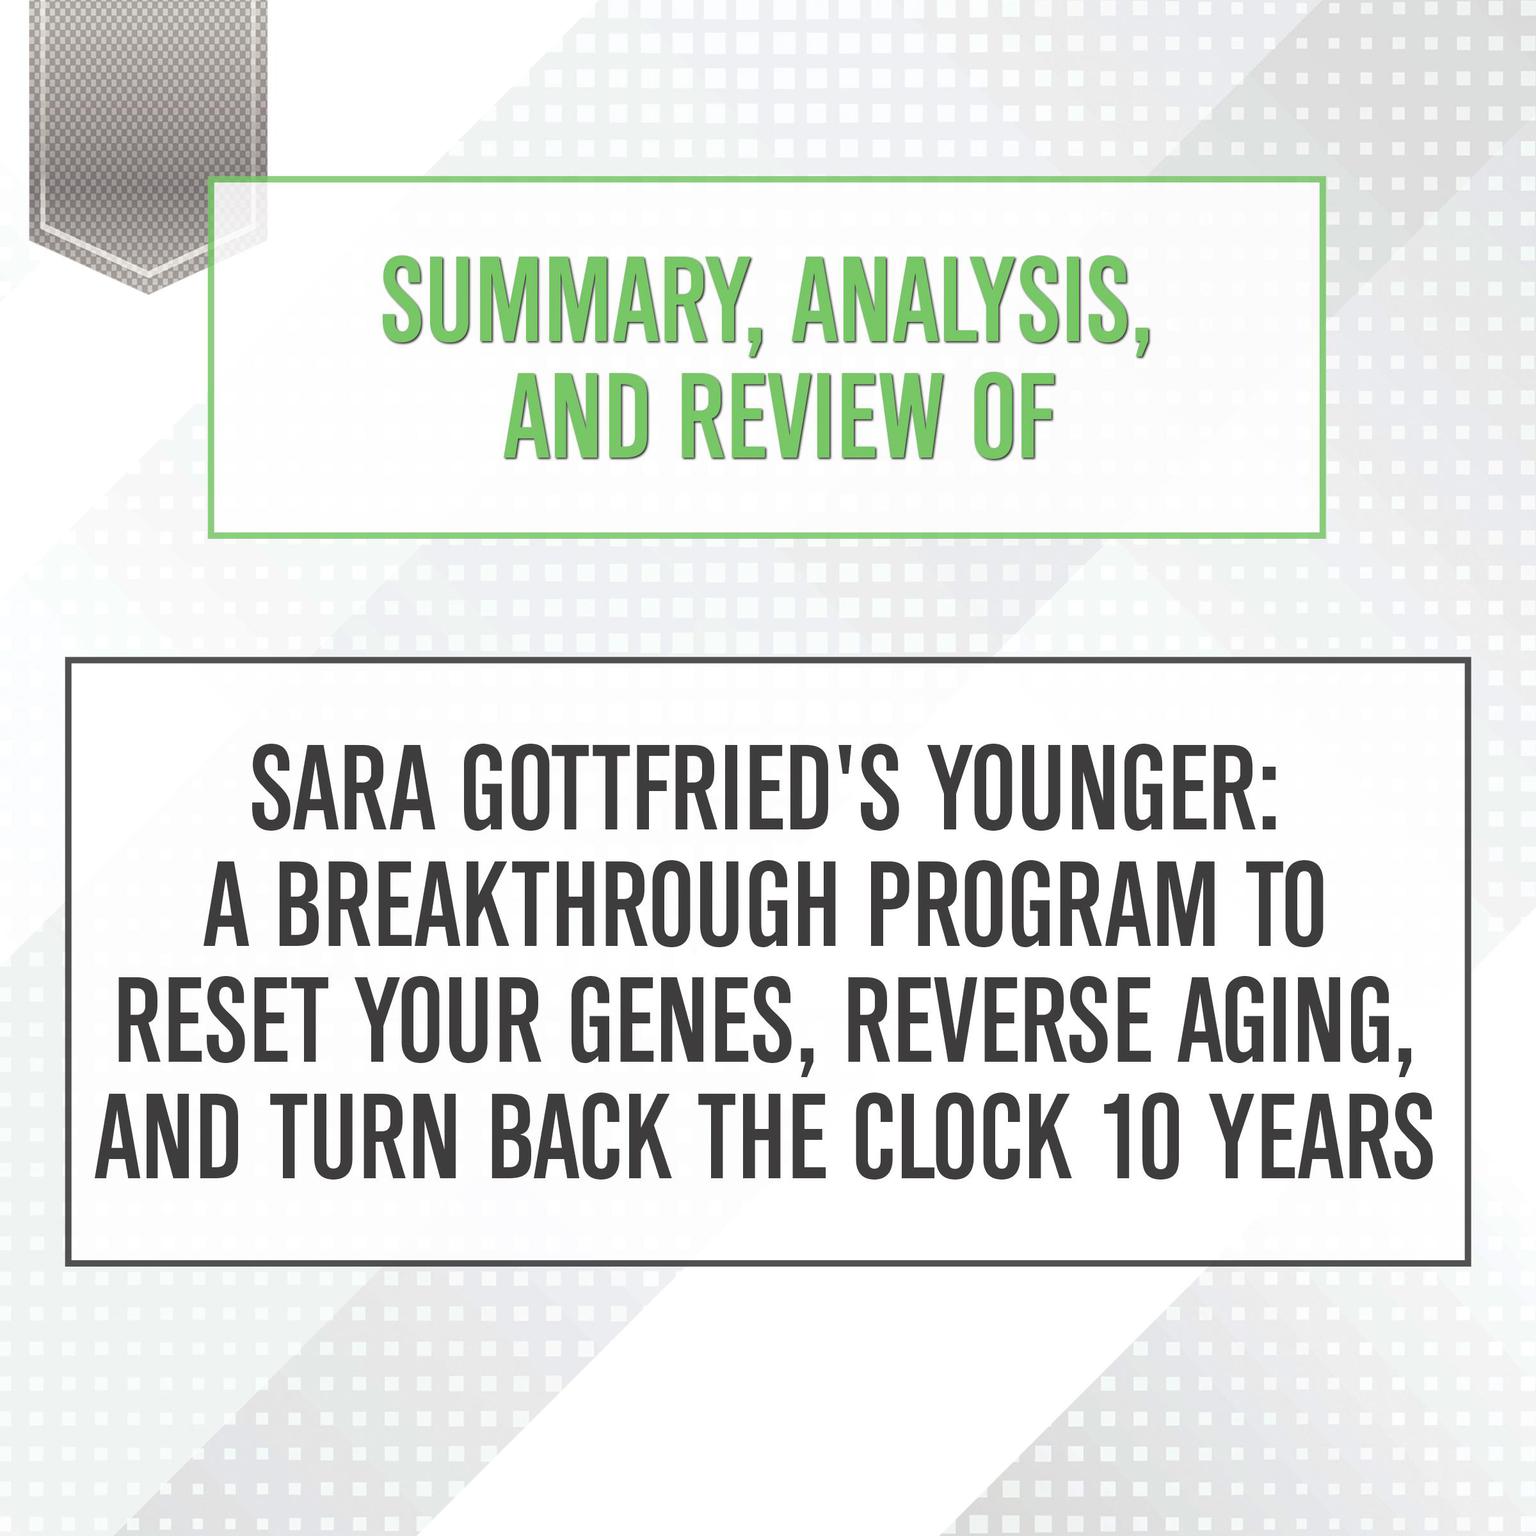 Summary, Analysis, and Review of Sara Gottfrieds Younger: A Breakthrough Program to Reset Your Genes, Reverse Aging, and Turn Back the Clock 10 Years Audiobook, by Start Publishing Notes